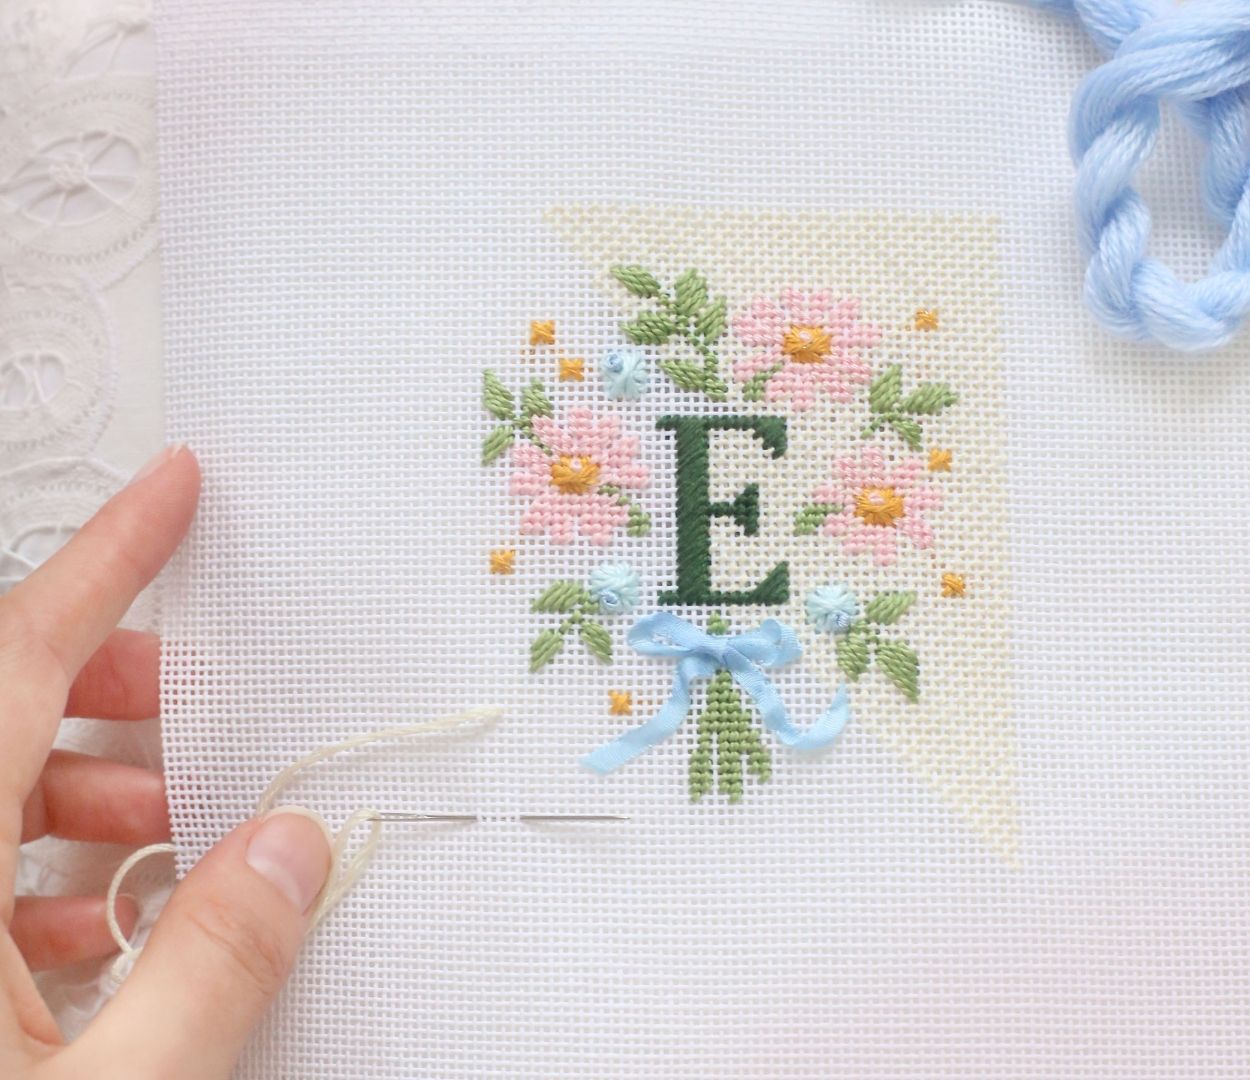 Wildflower Field - Three Charted Monograms E-Pattern with the letter E.